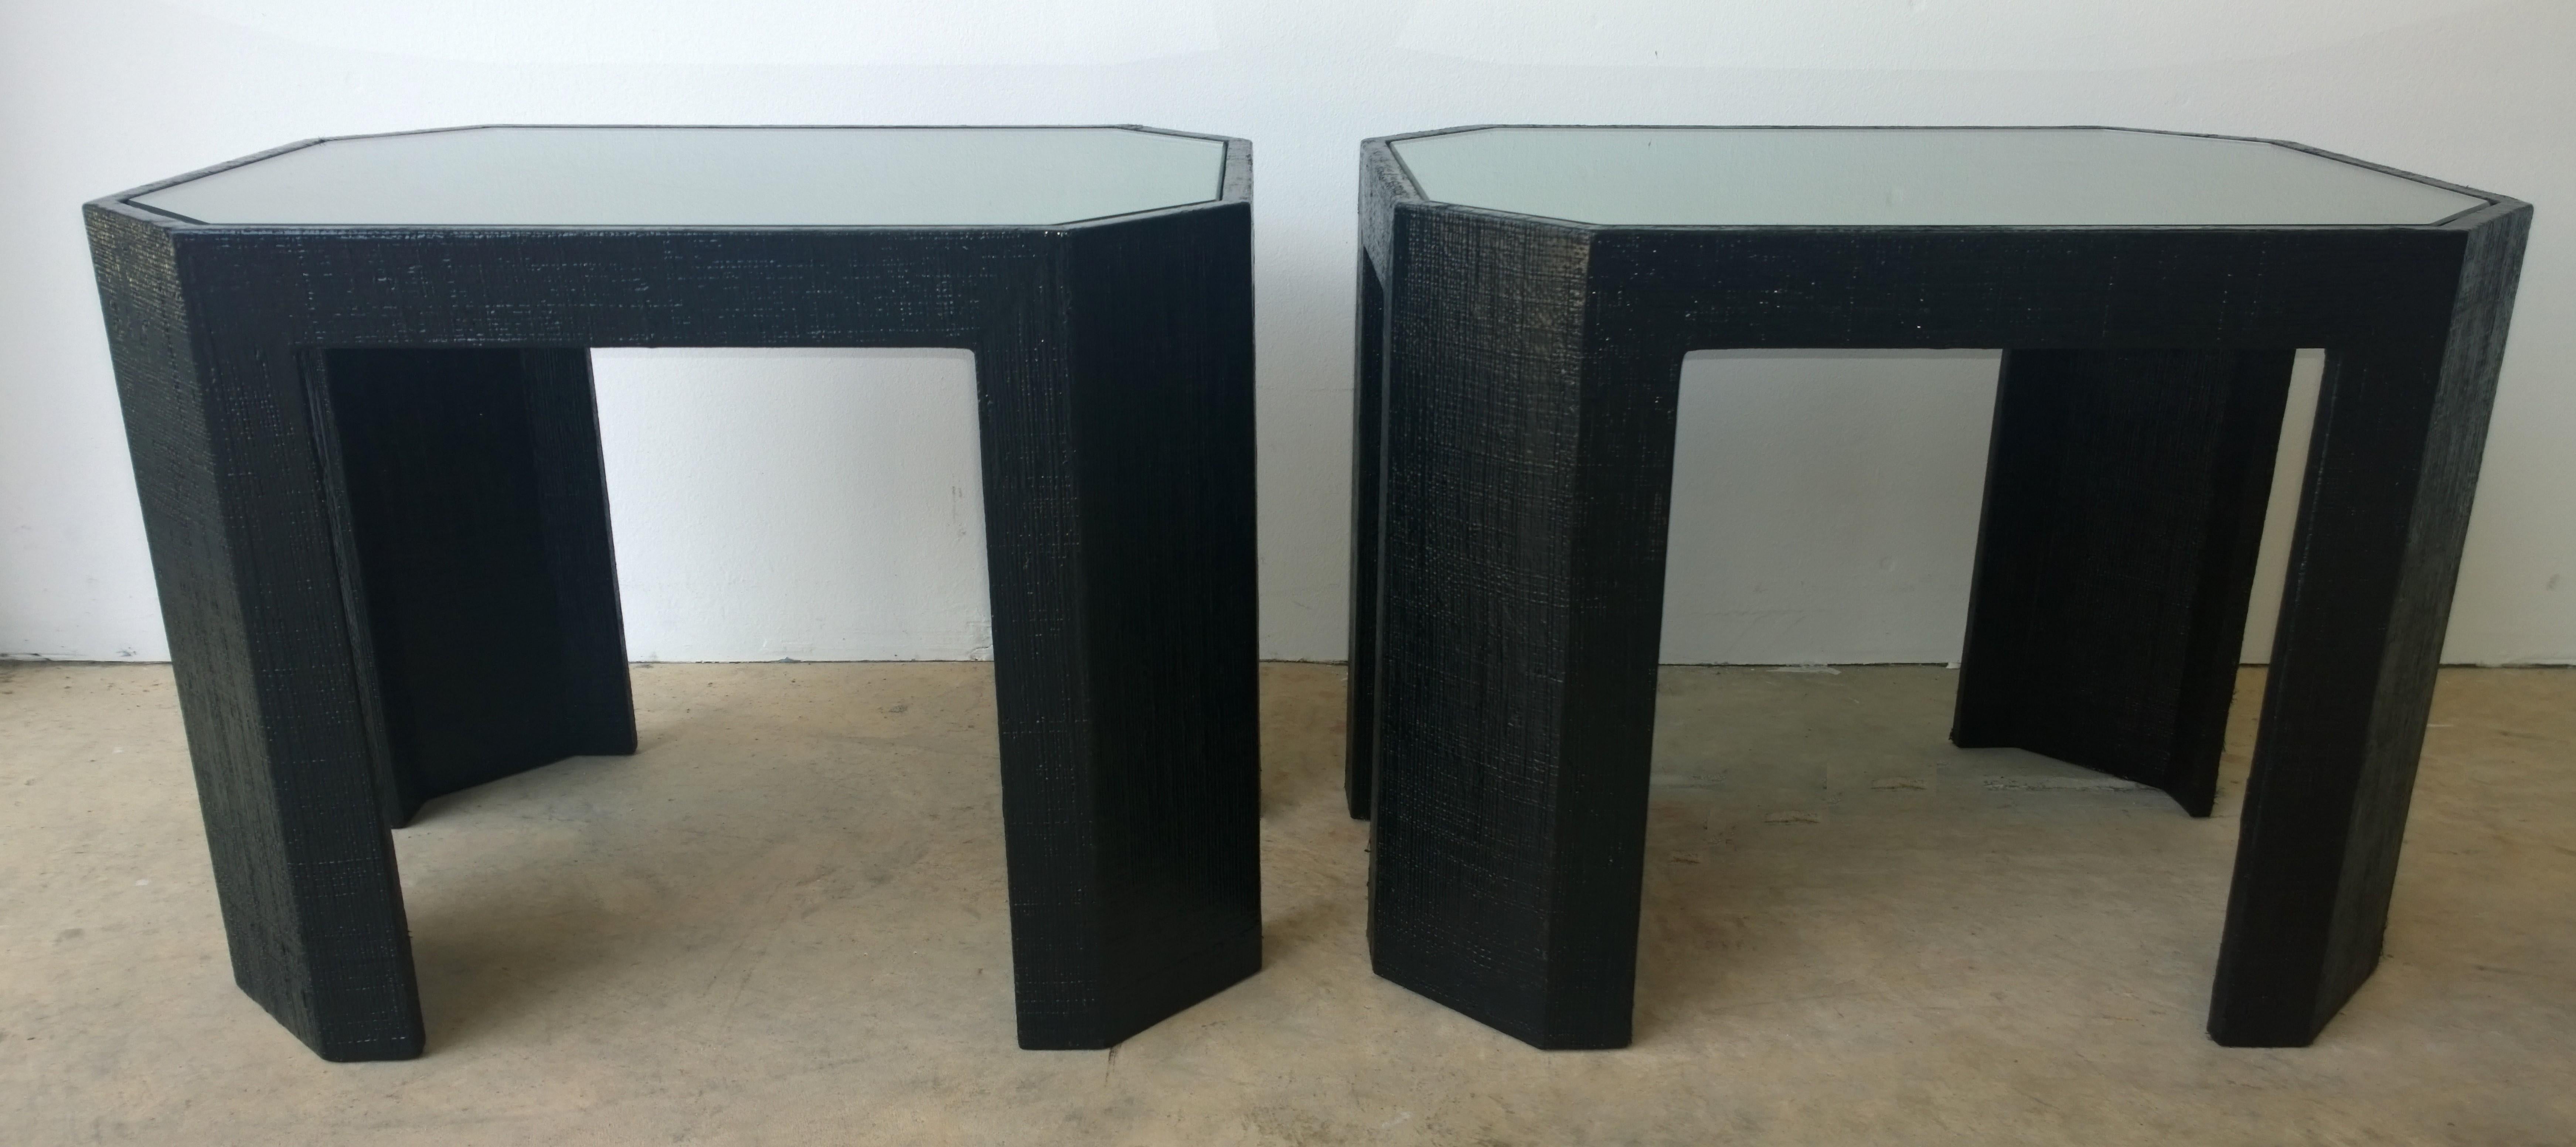 Offered are a pair of Mid-Century Modern Lorin Marsh LDT newly lacquered in black grasscloth with inlaid rectangular with niched corners inlaid glass tops side / end /bedside tables. Lorin Marsh, founded in 1975, is a high end luxury custom